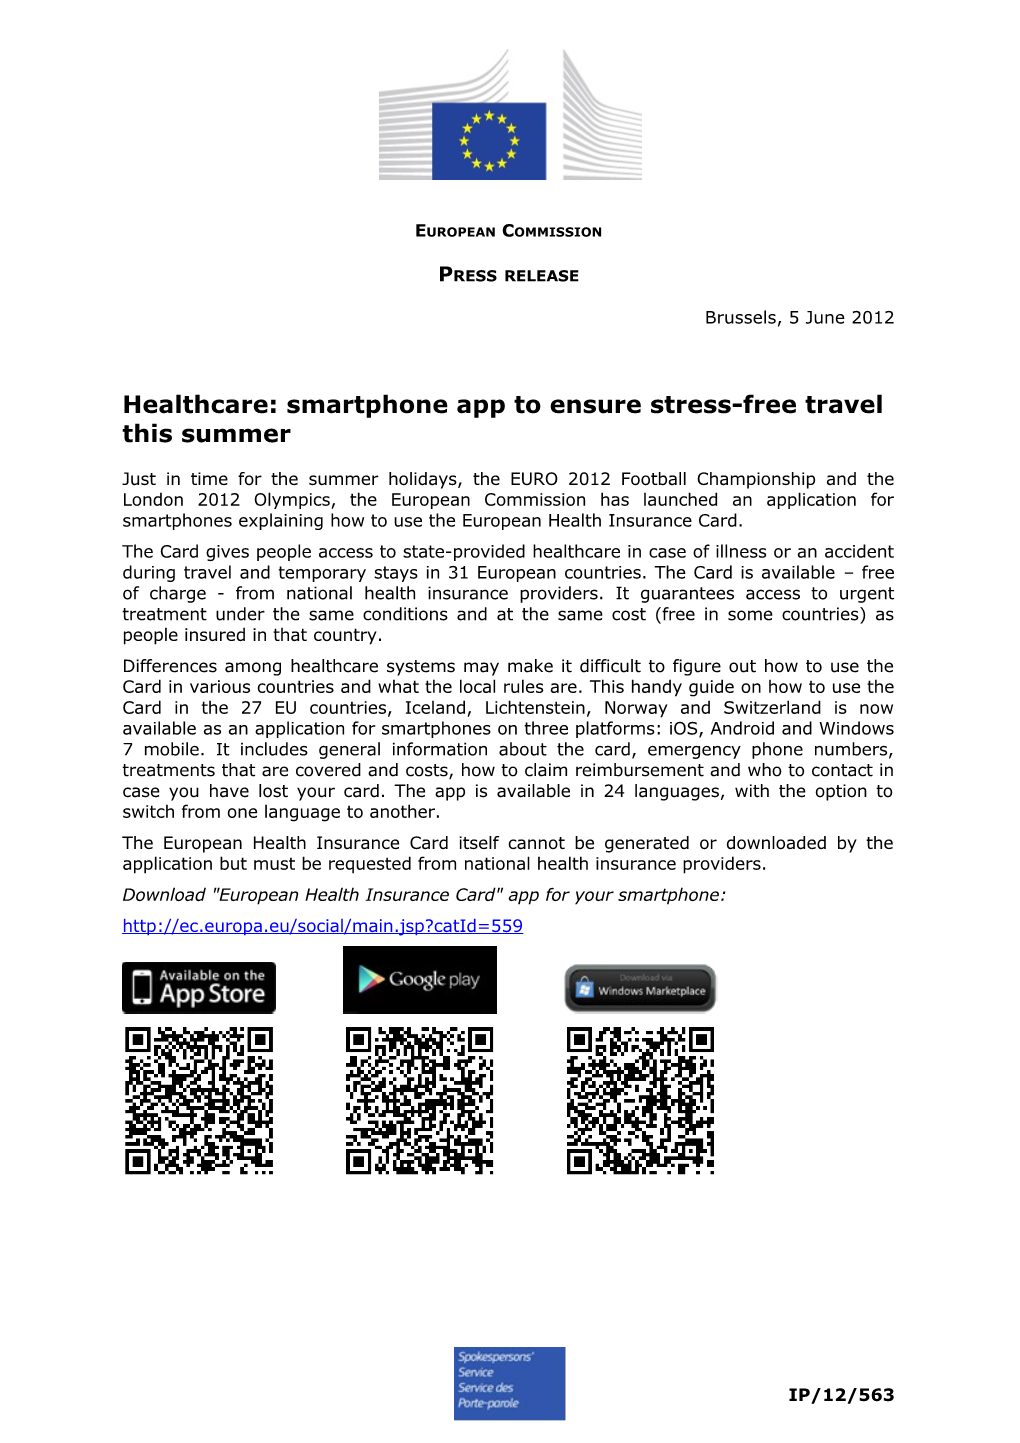 Healthcare: Smartphoneapp to Ensure Stress-Free Travel This Summer